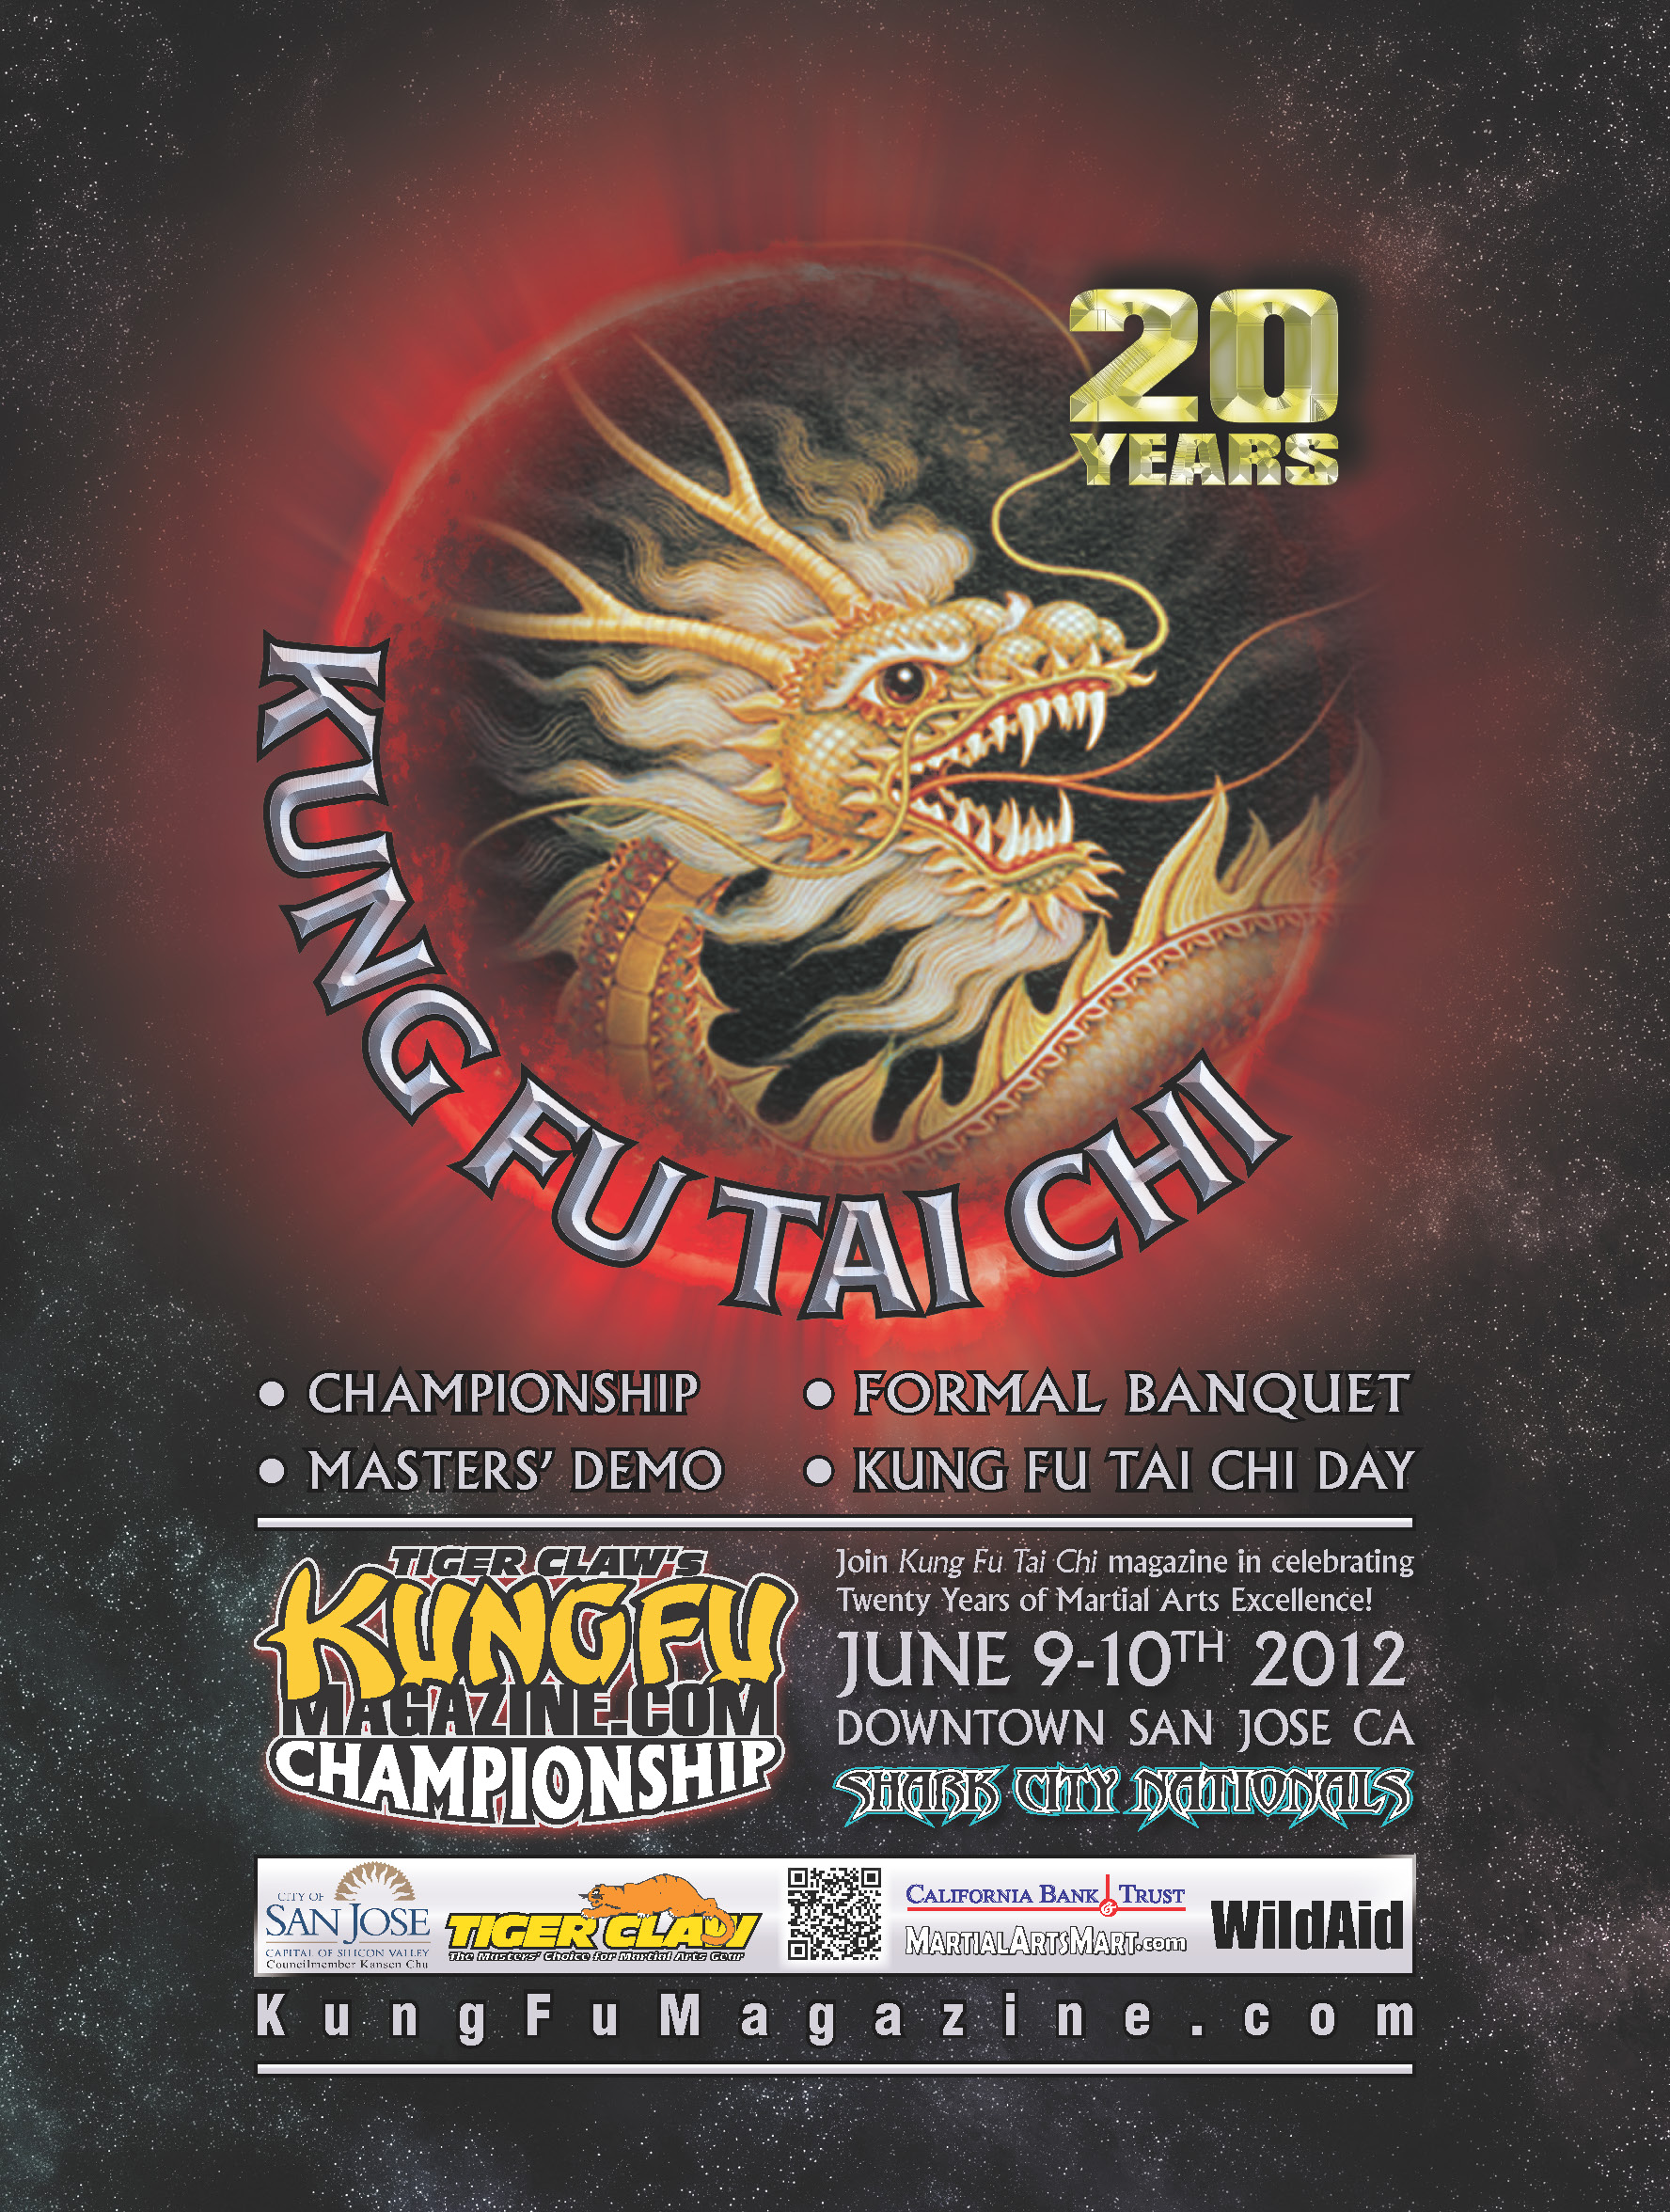 KFTC20 event poster